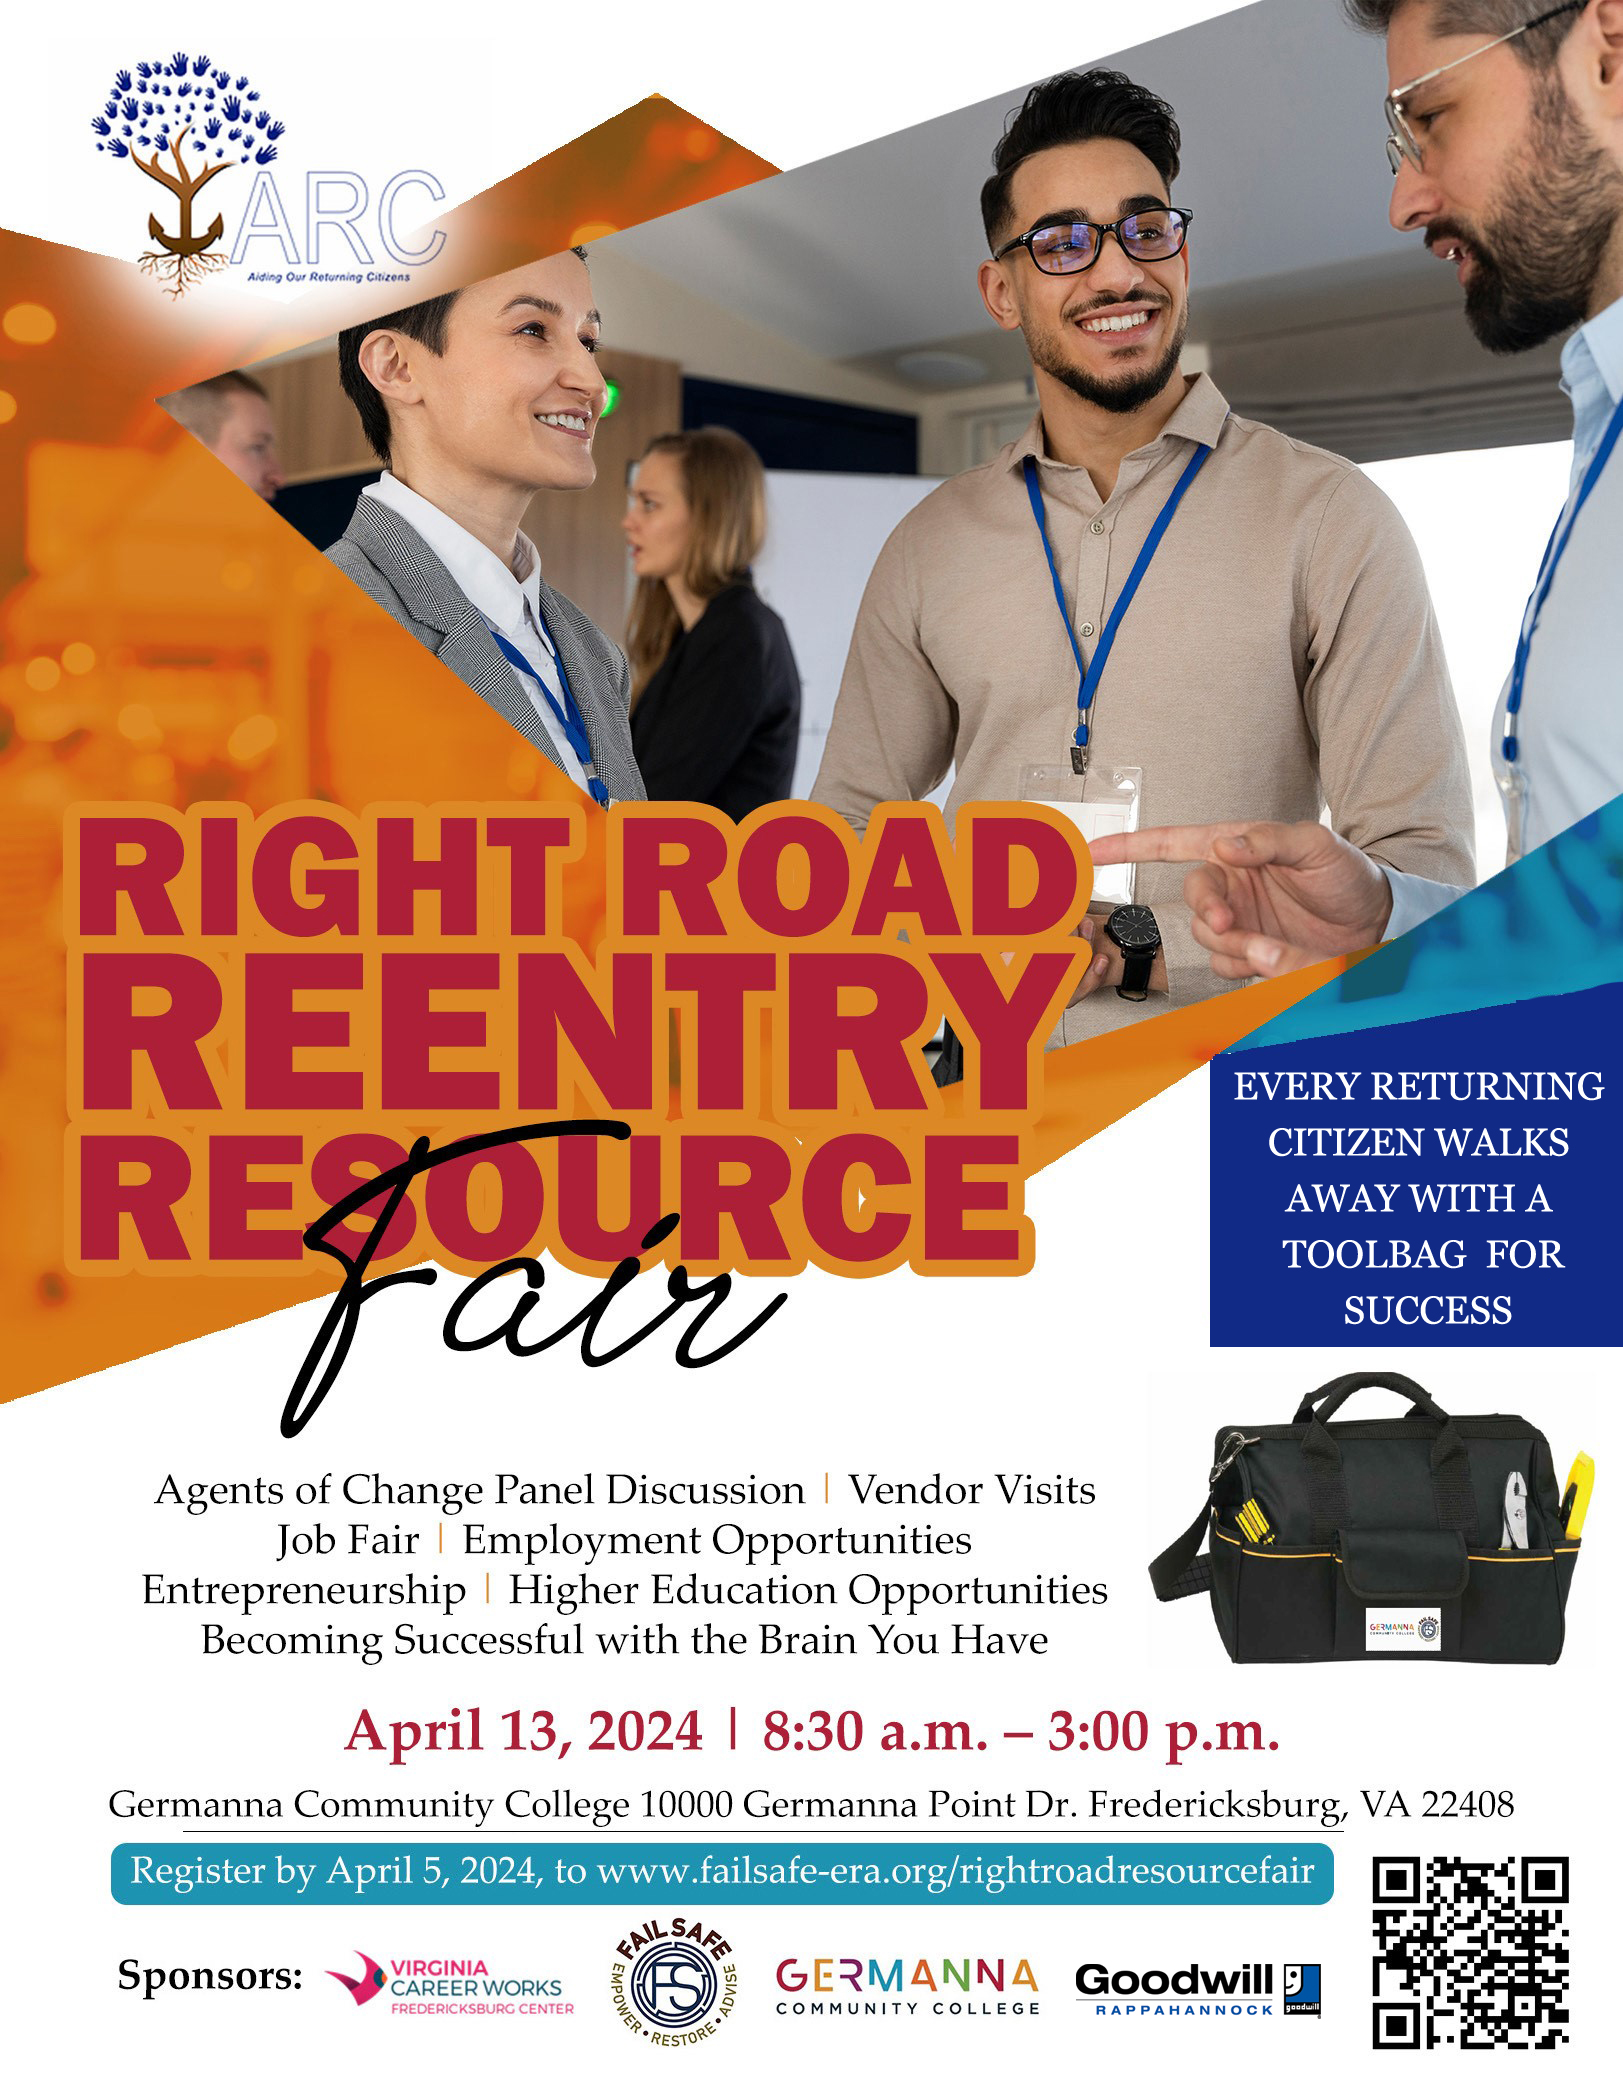 FailSafe Right Road Reentry Resource Fair